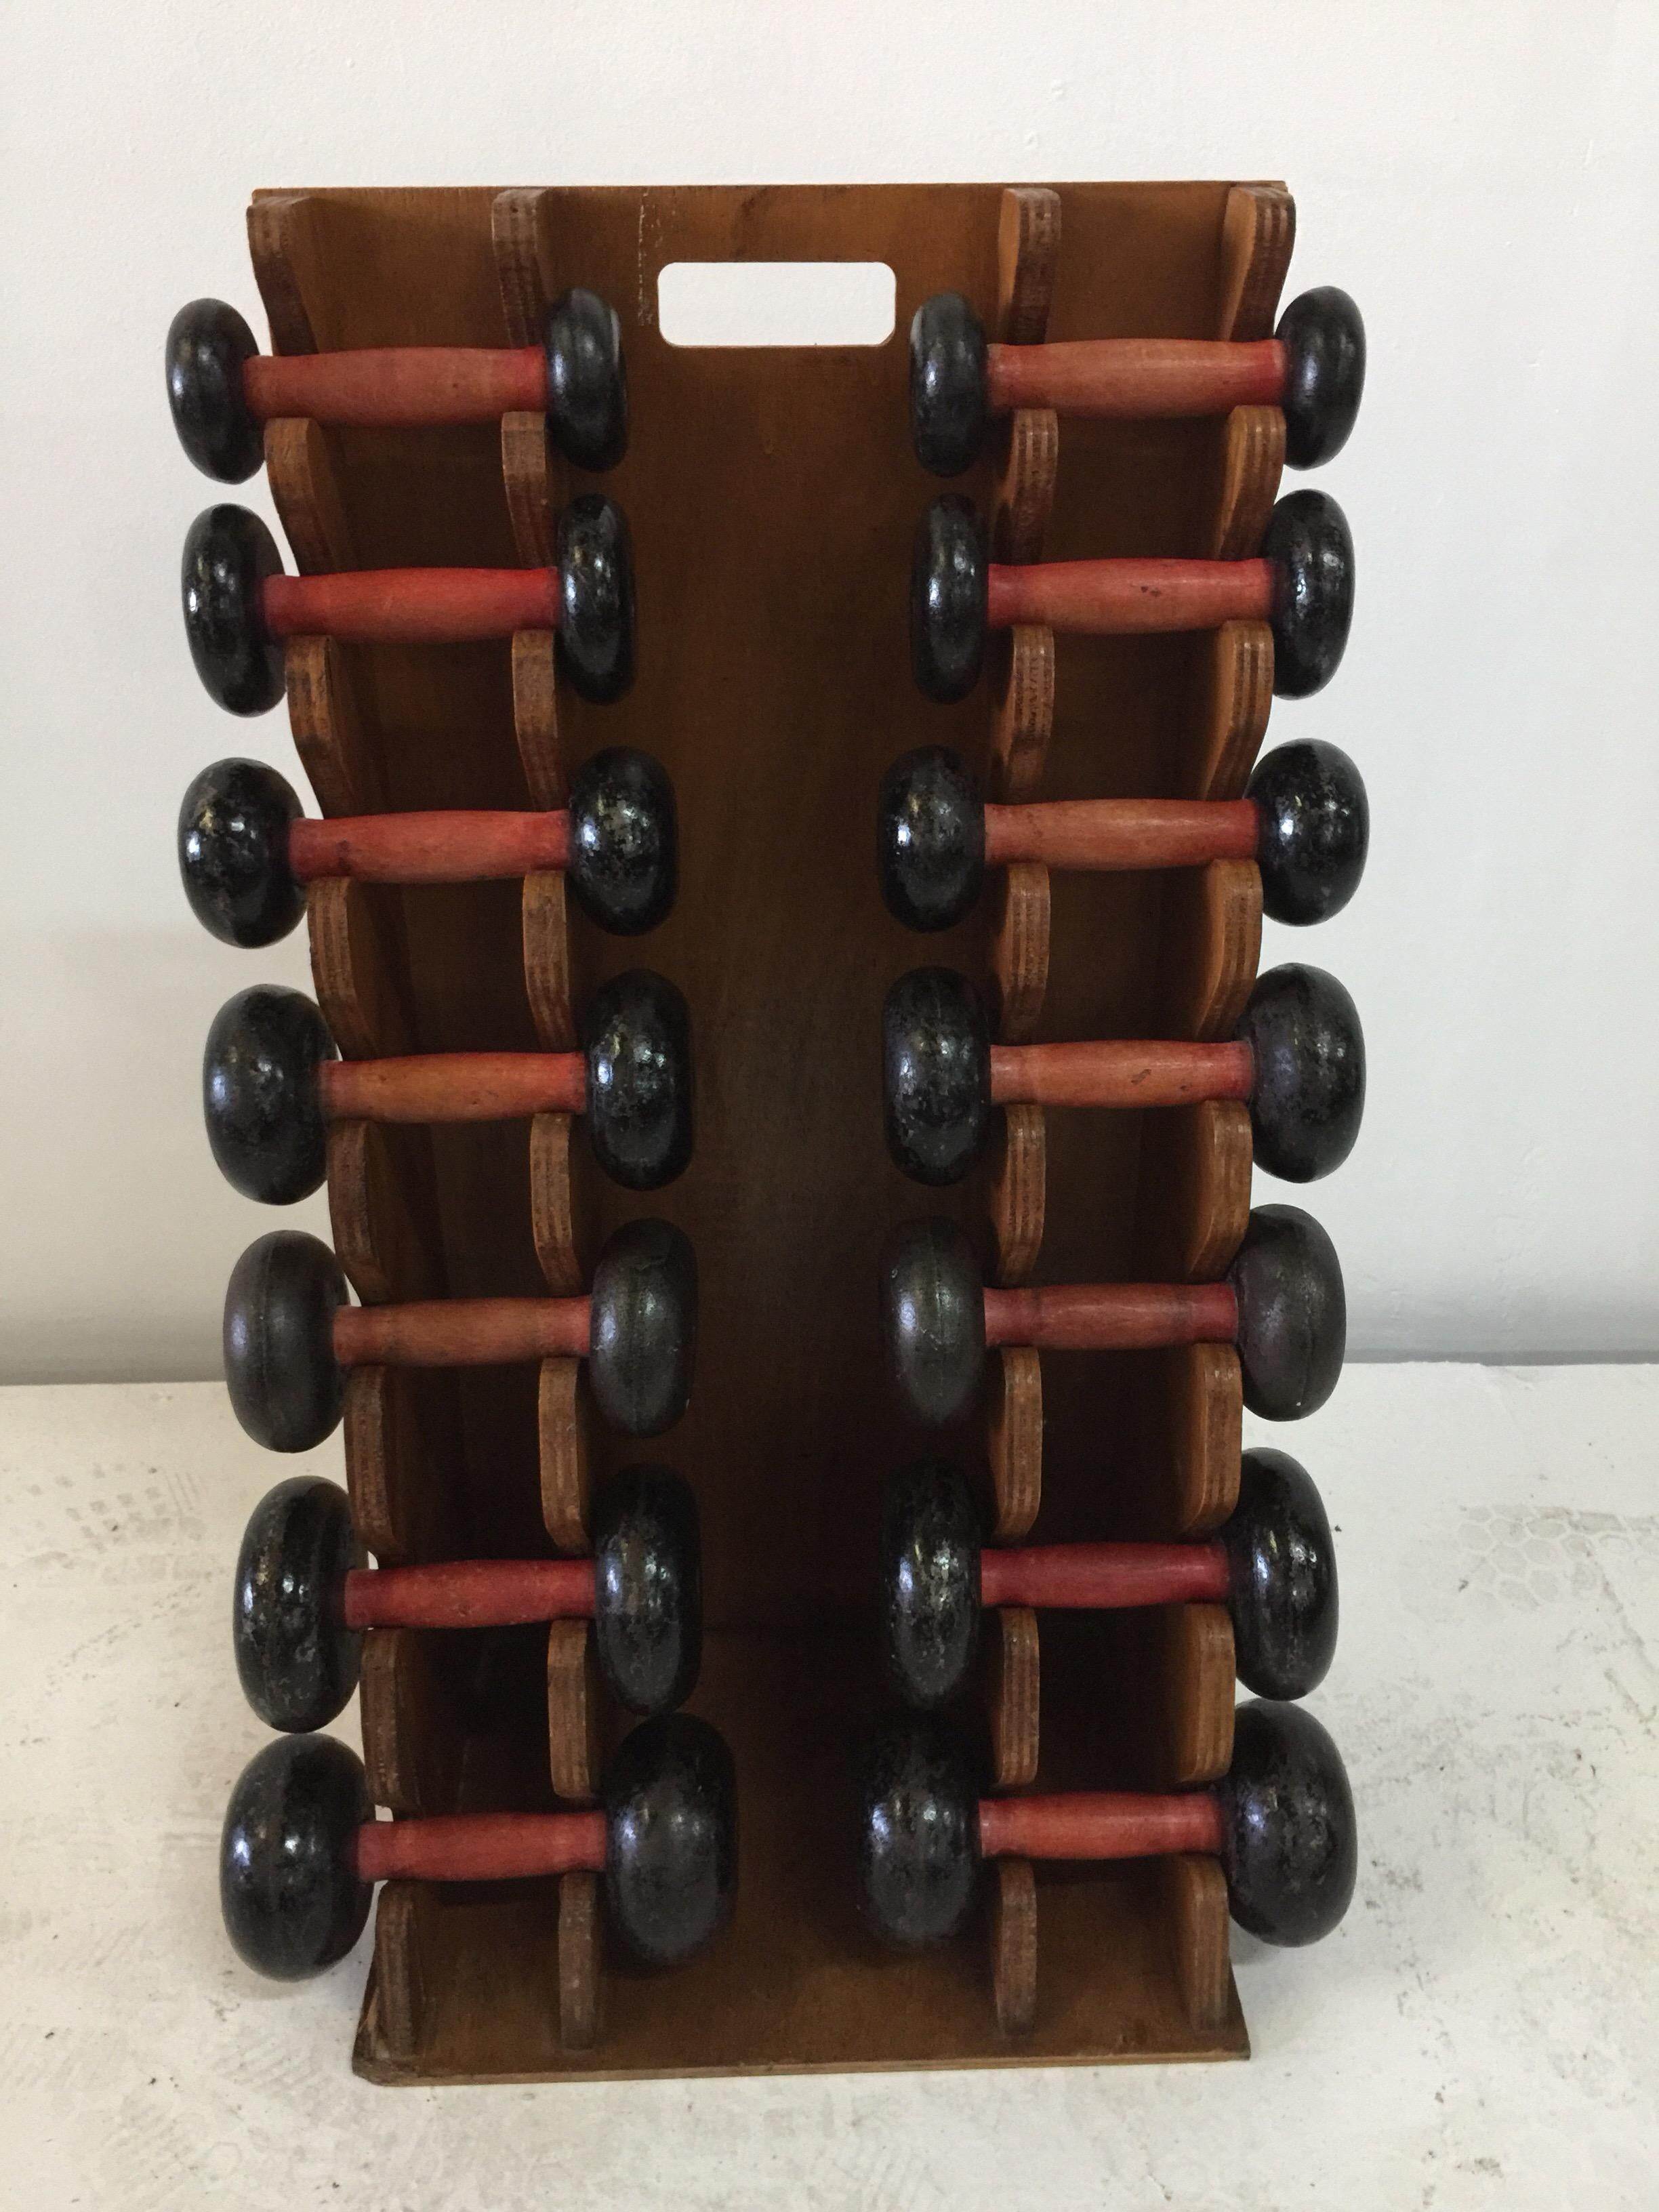 This extraordinary weights set on stand consists of 7 pairs of dumbbells with painted wooden handles and cast iron weights. All original and shows great aging and patina. The set is solid and functional. Perfect addition to a home gym.  Weights